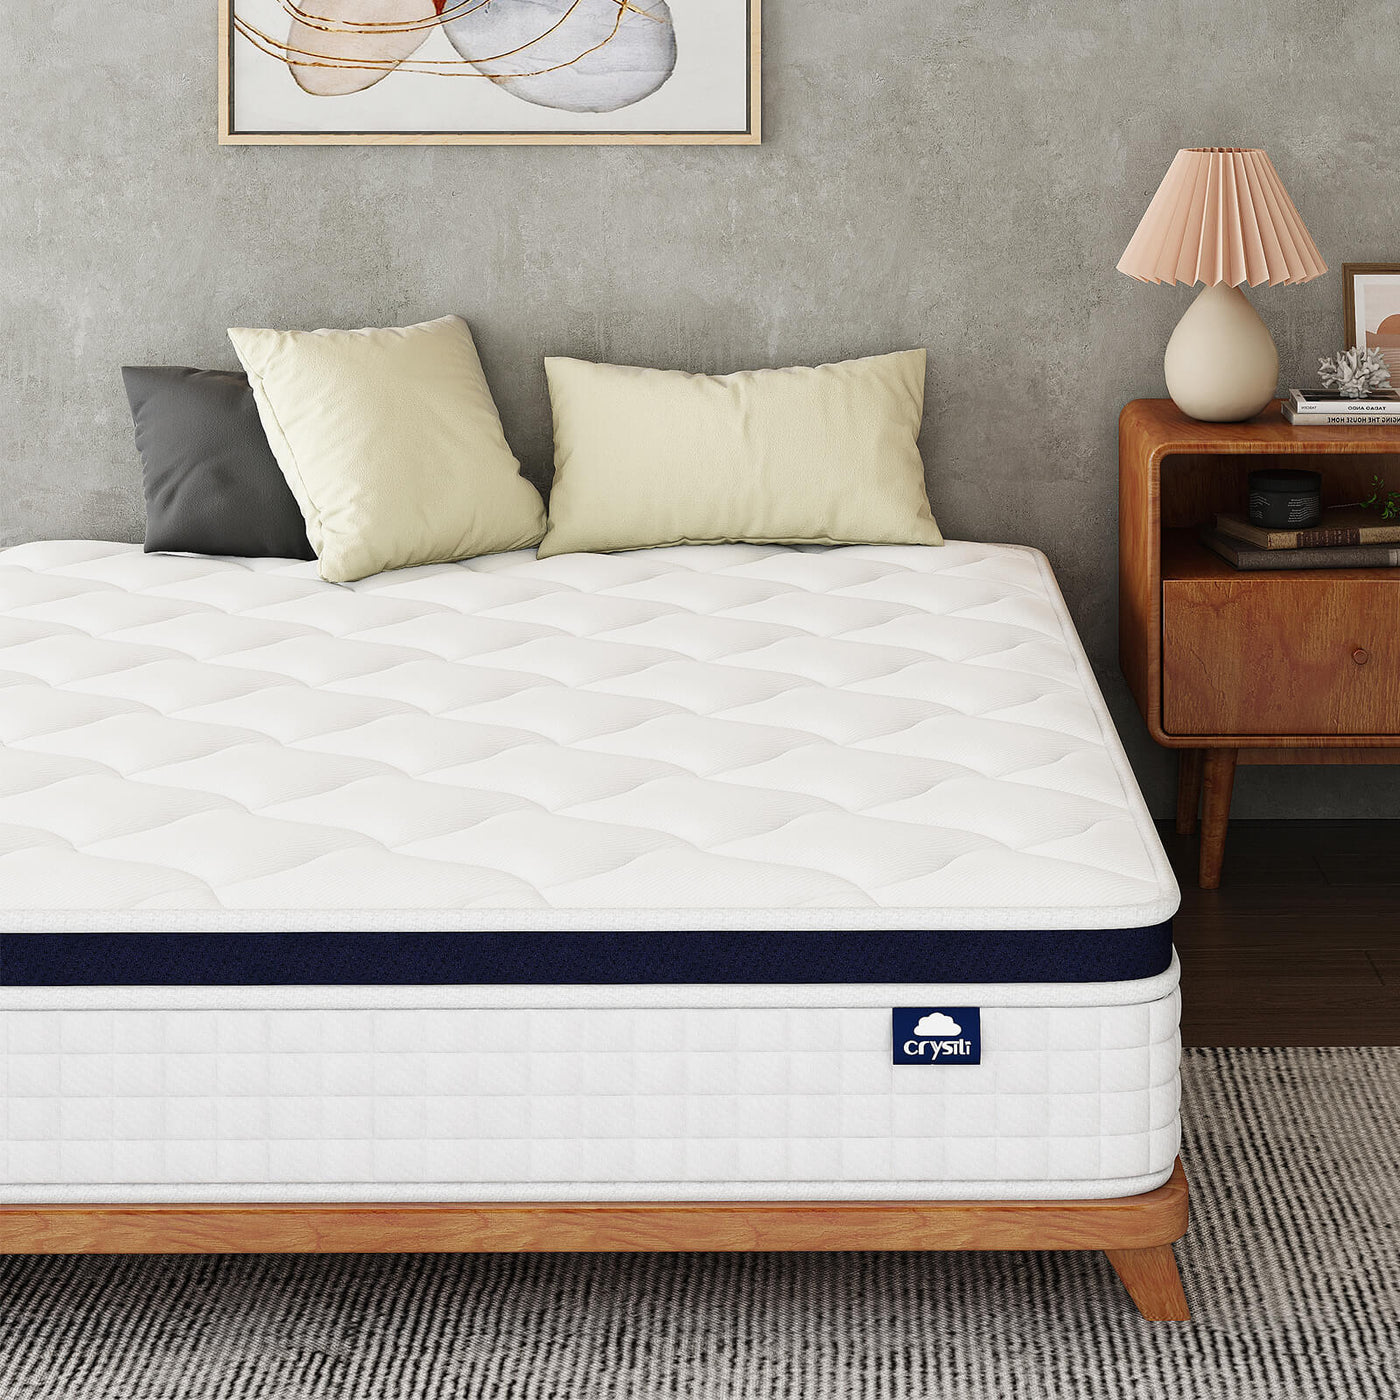 Big Promotion Crystli Midnight Collection 10 inch  Innerspring Mattress with Zero Pressure Foam(US)